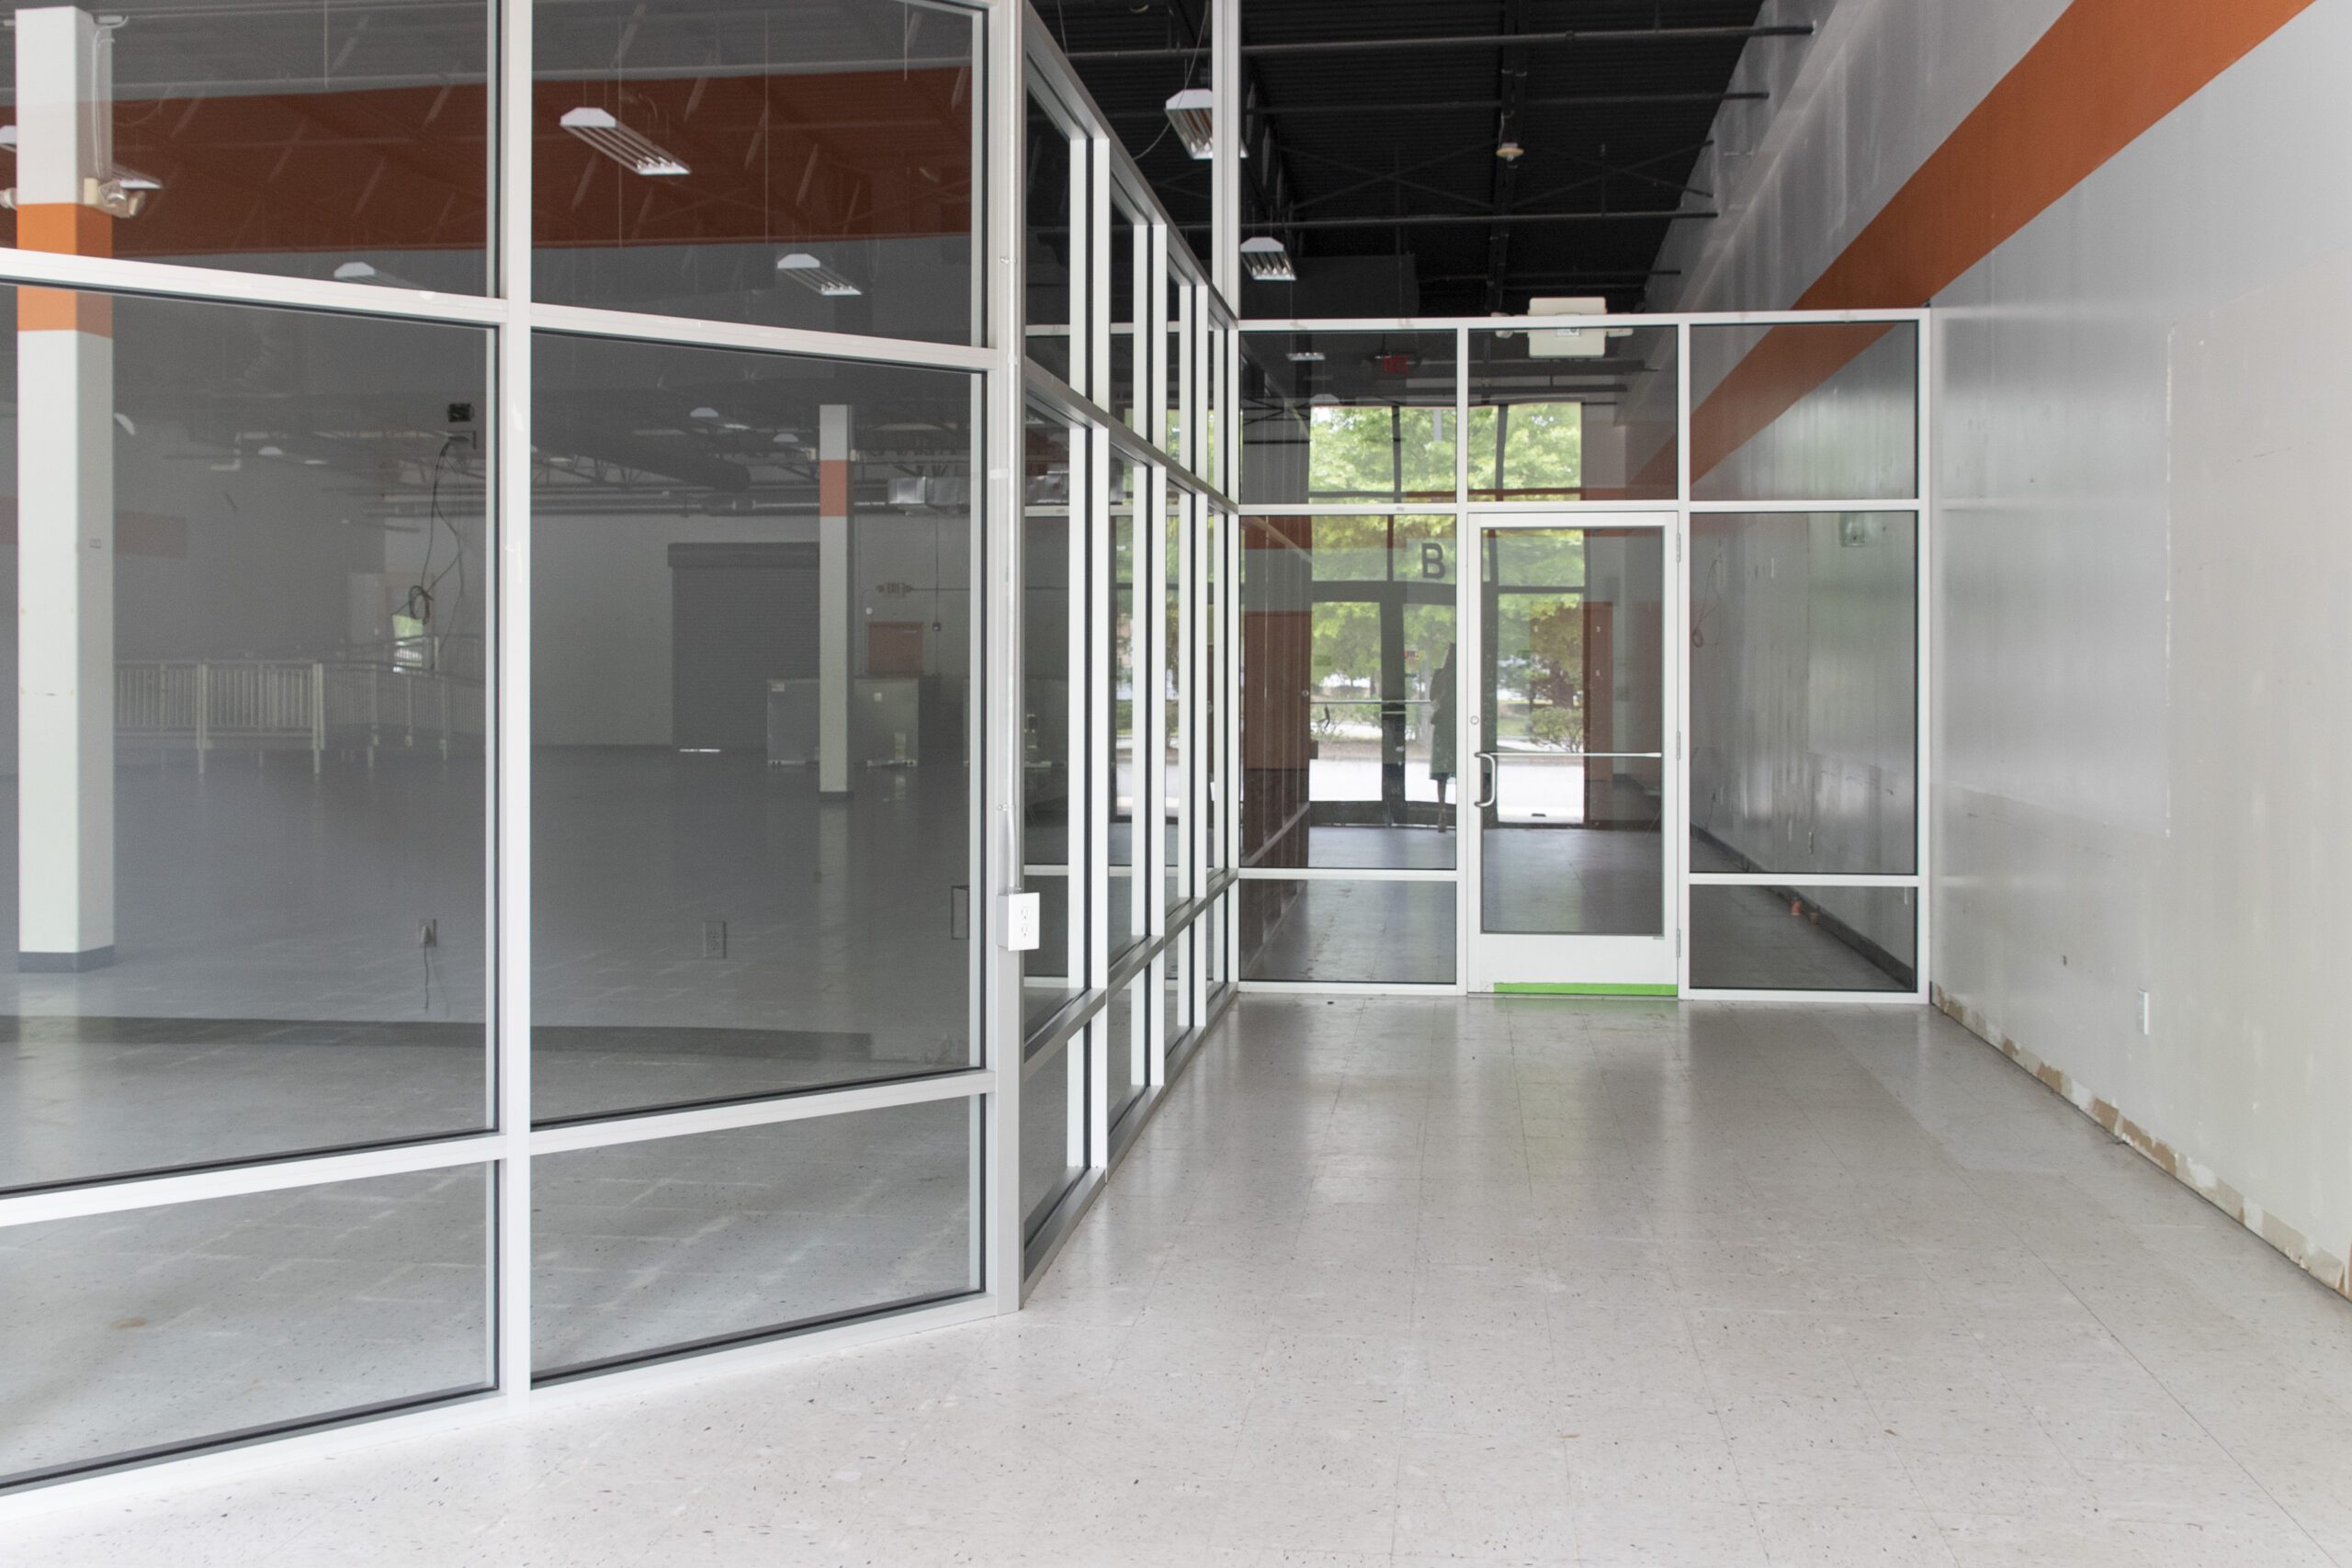 Parkway Shopping Interior with glass doors and windows